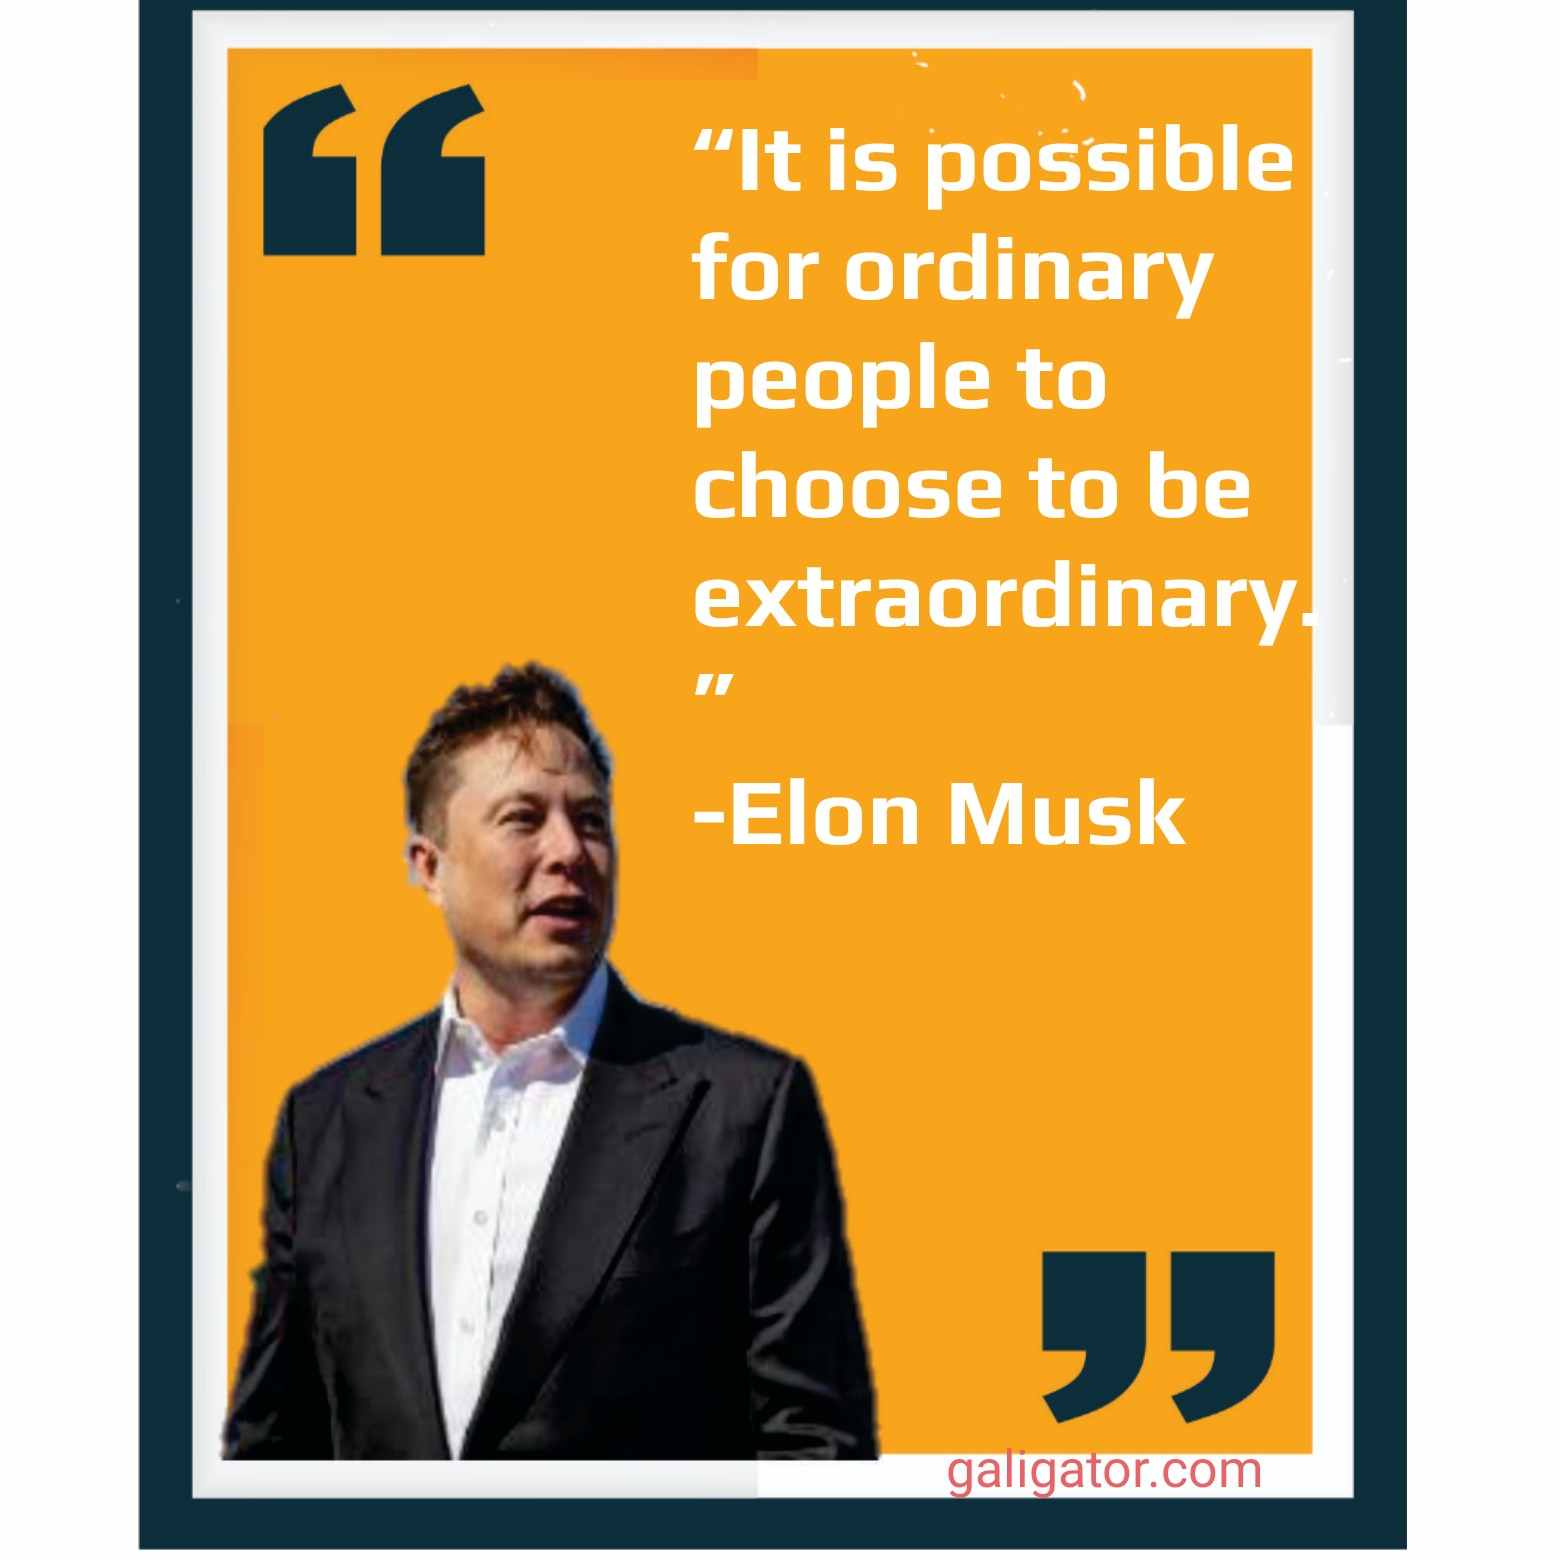  elon musk quotes, elon musk motivational quotes, elon musk quotes in hindi ,  wallpaper elon musk quotes,  elon musk motivational quotes in hindi , elon musk quotes wallpaper, elon musk inspirational quotes,  thoughts of elon musk